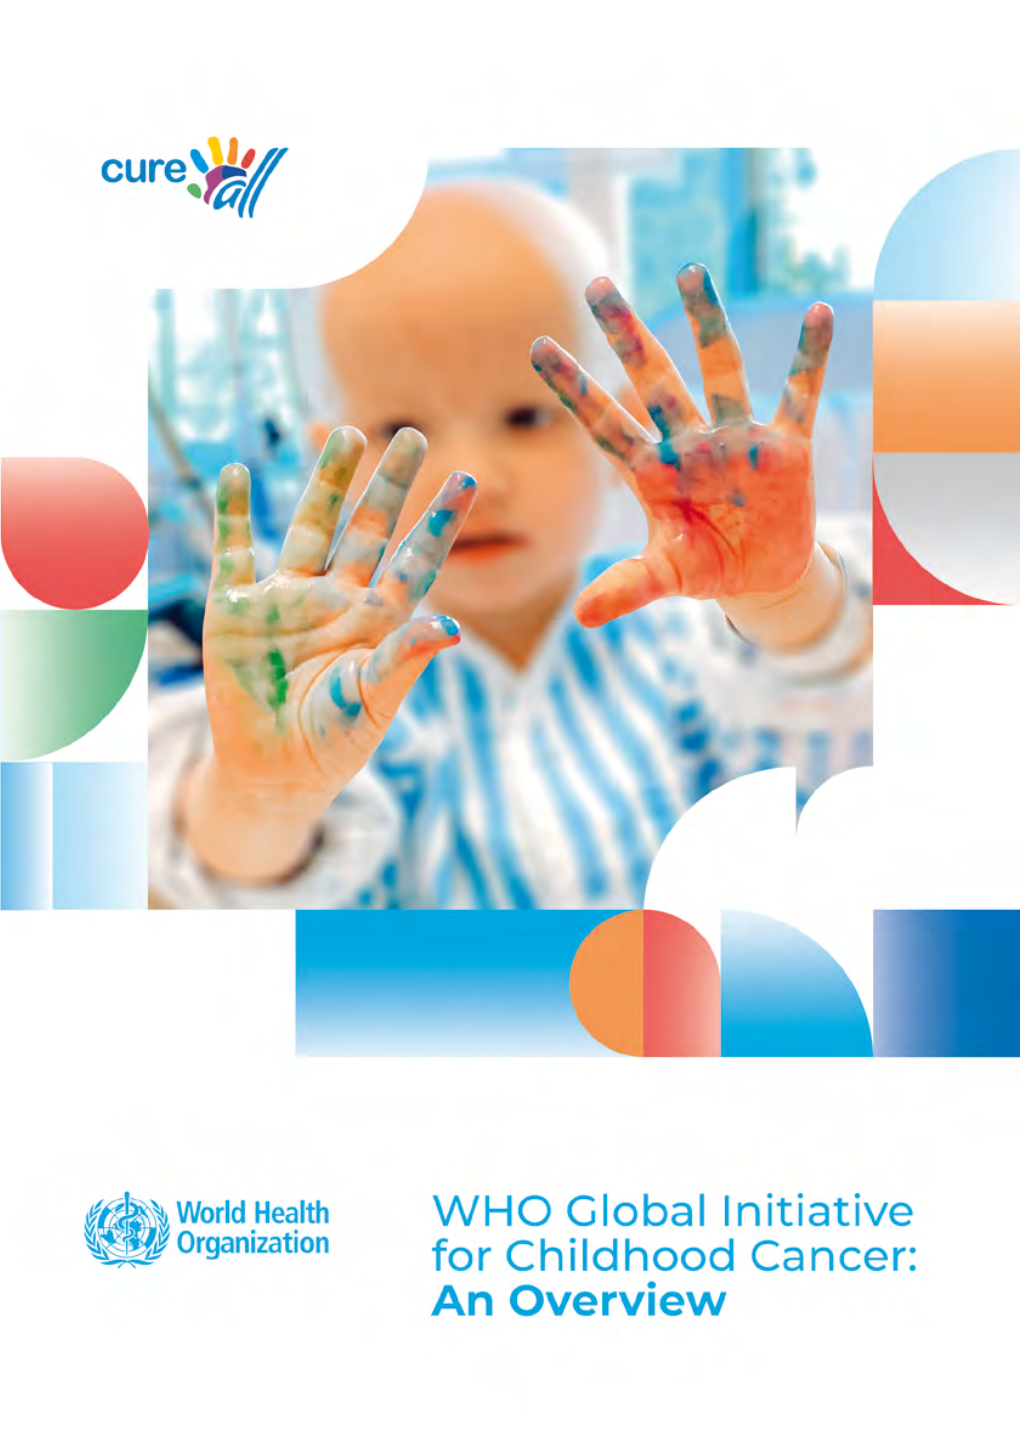 The Global Initiative for Childhood Cancer